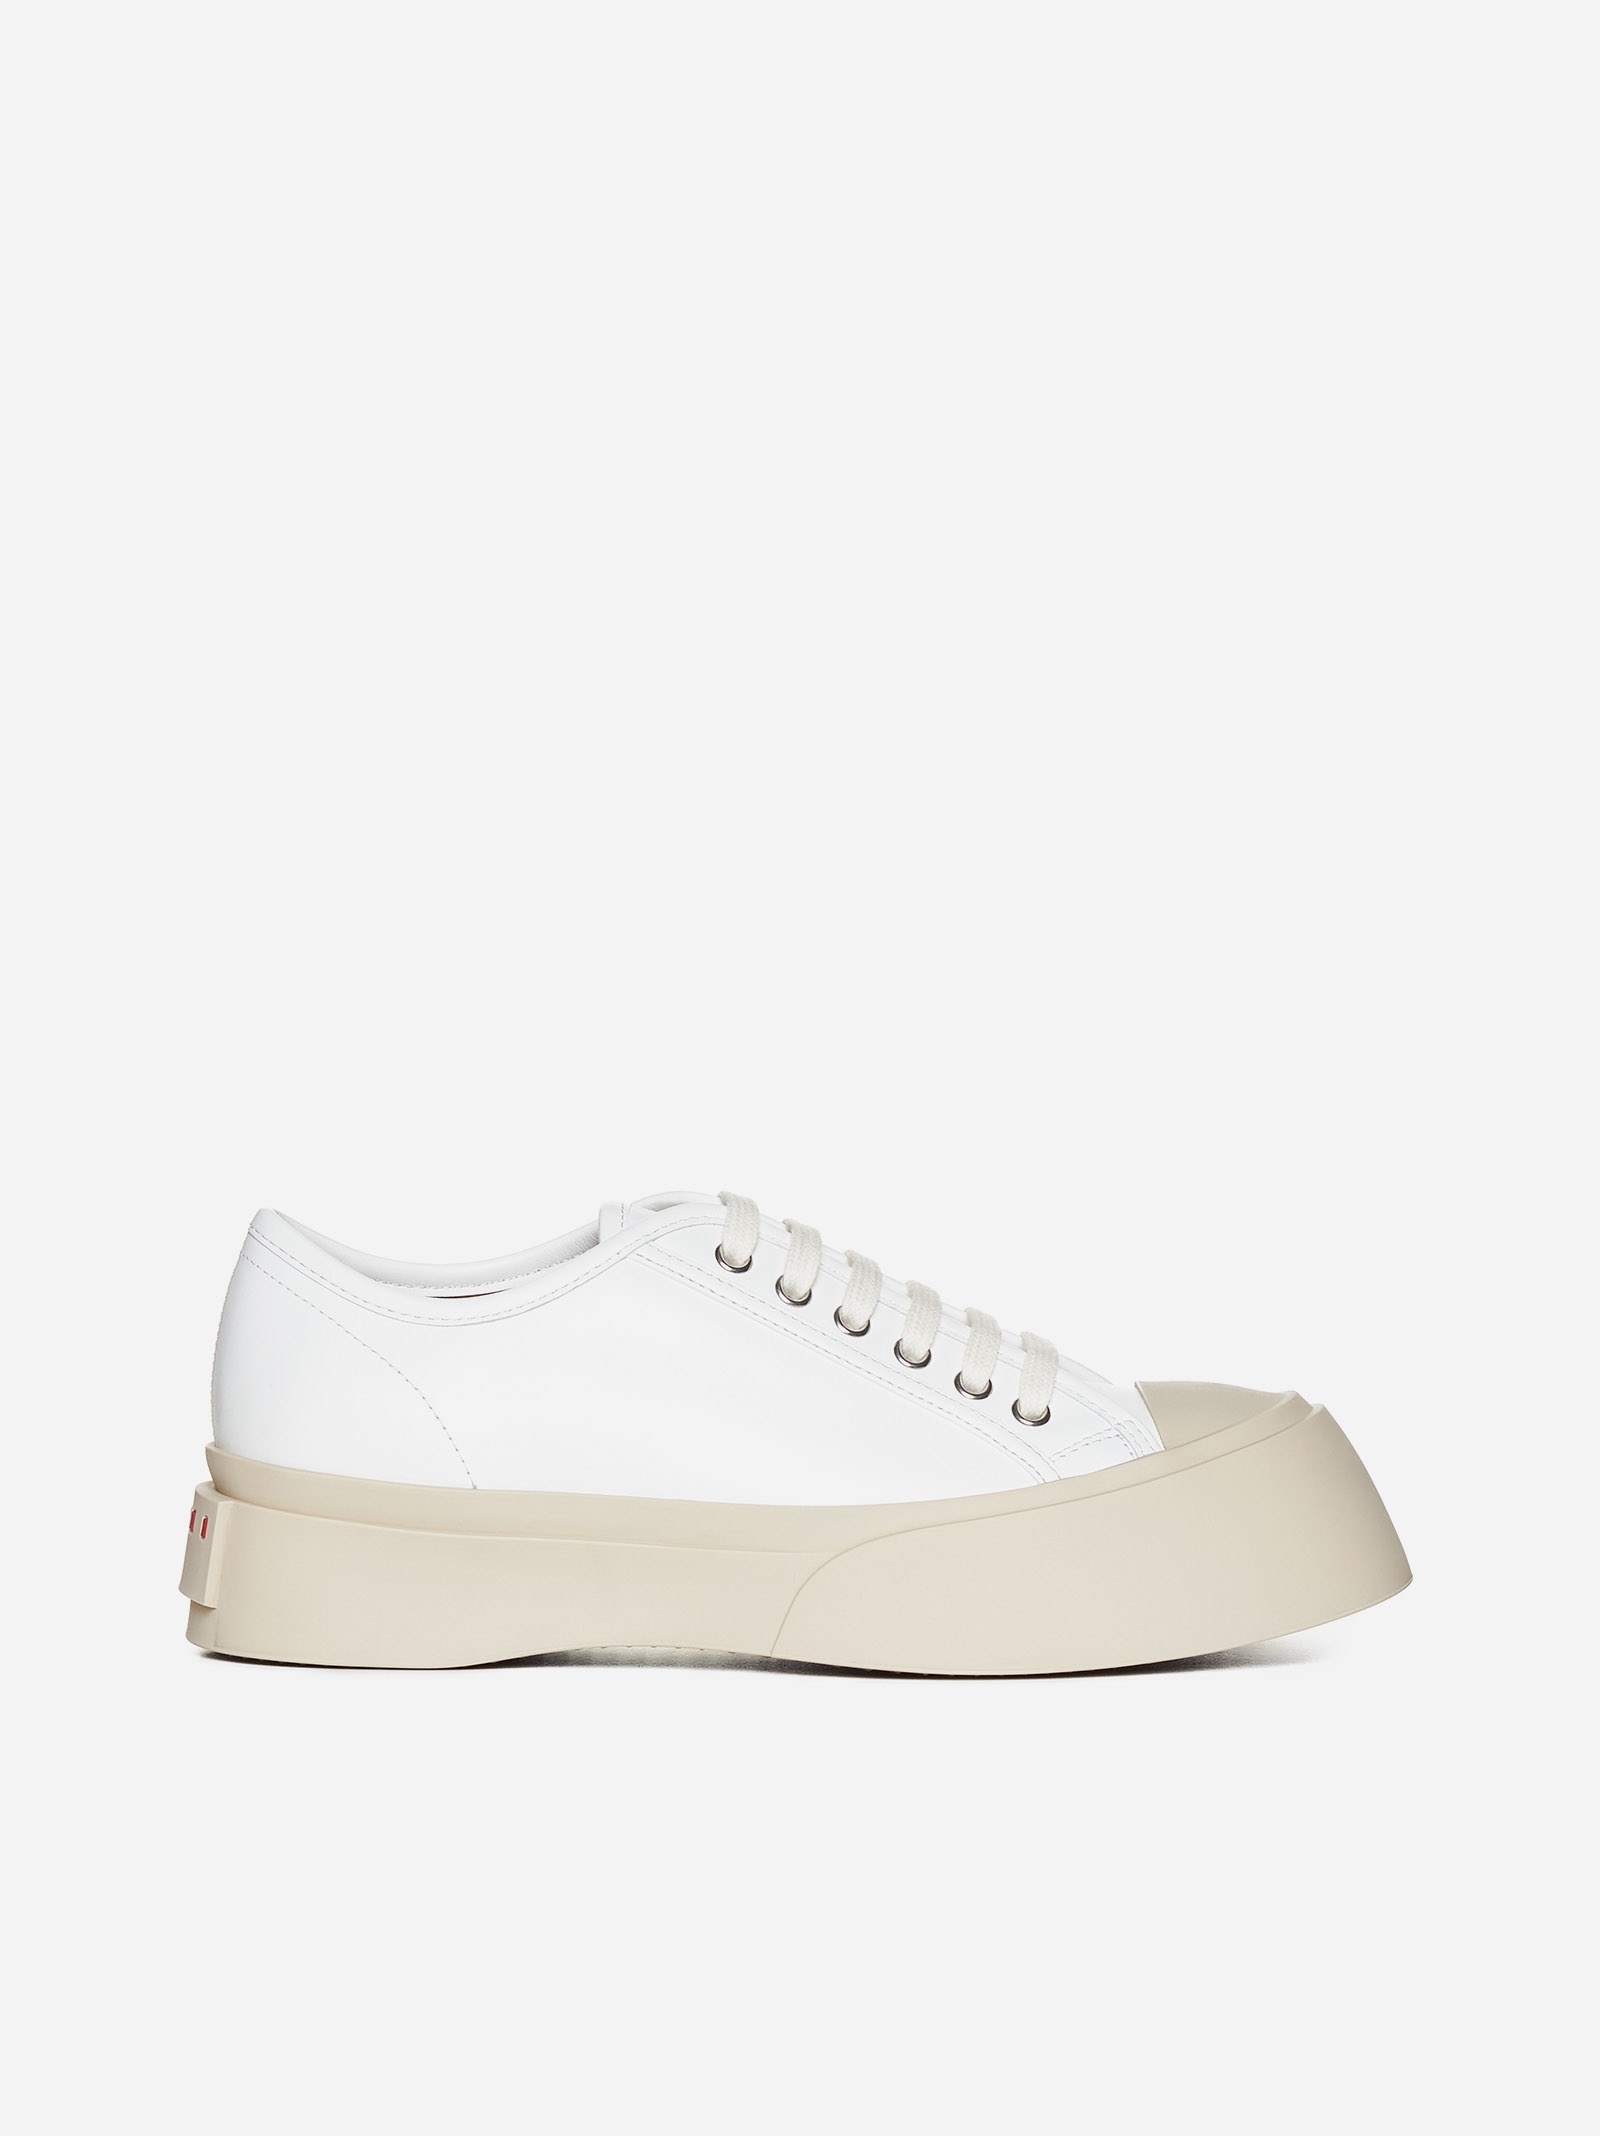 Pablo leather sneakers - 1